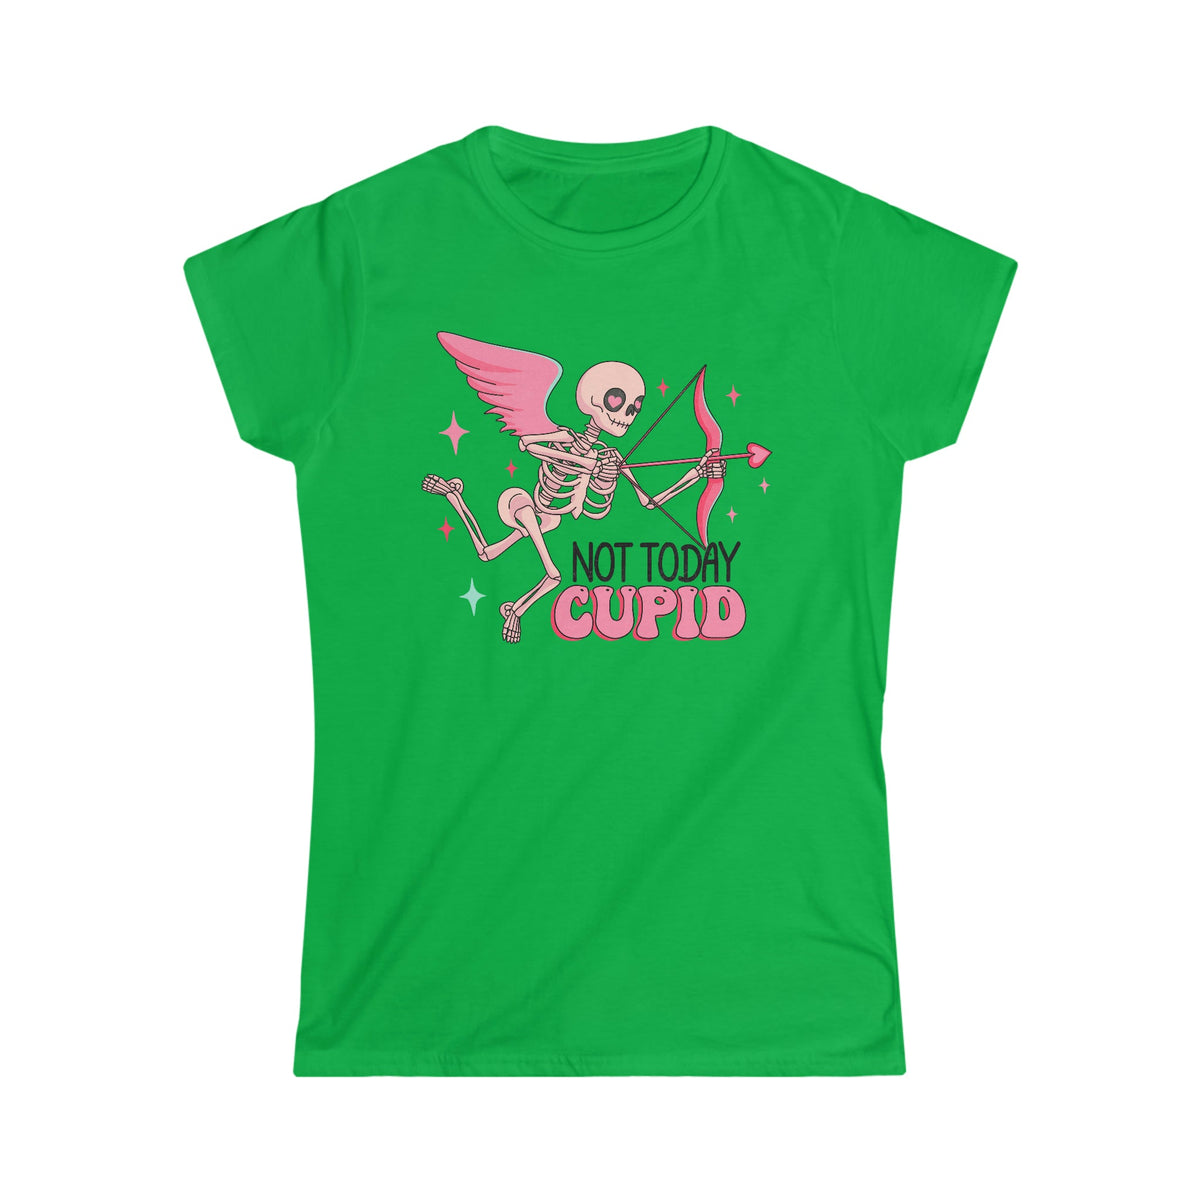 Not Today, Cupid Women's Softstyle Tee - Salty Medic Clothing Co.